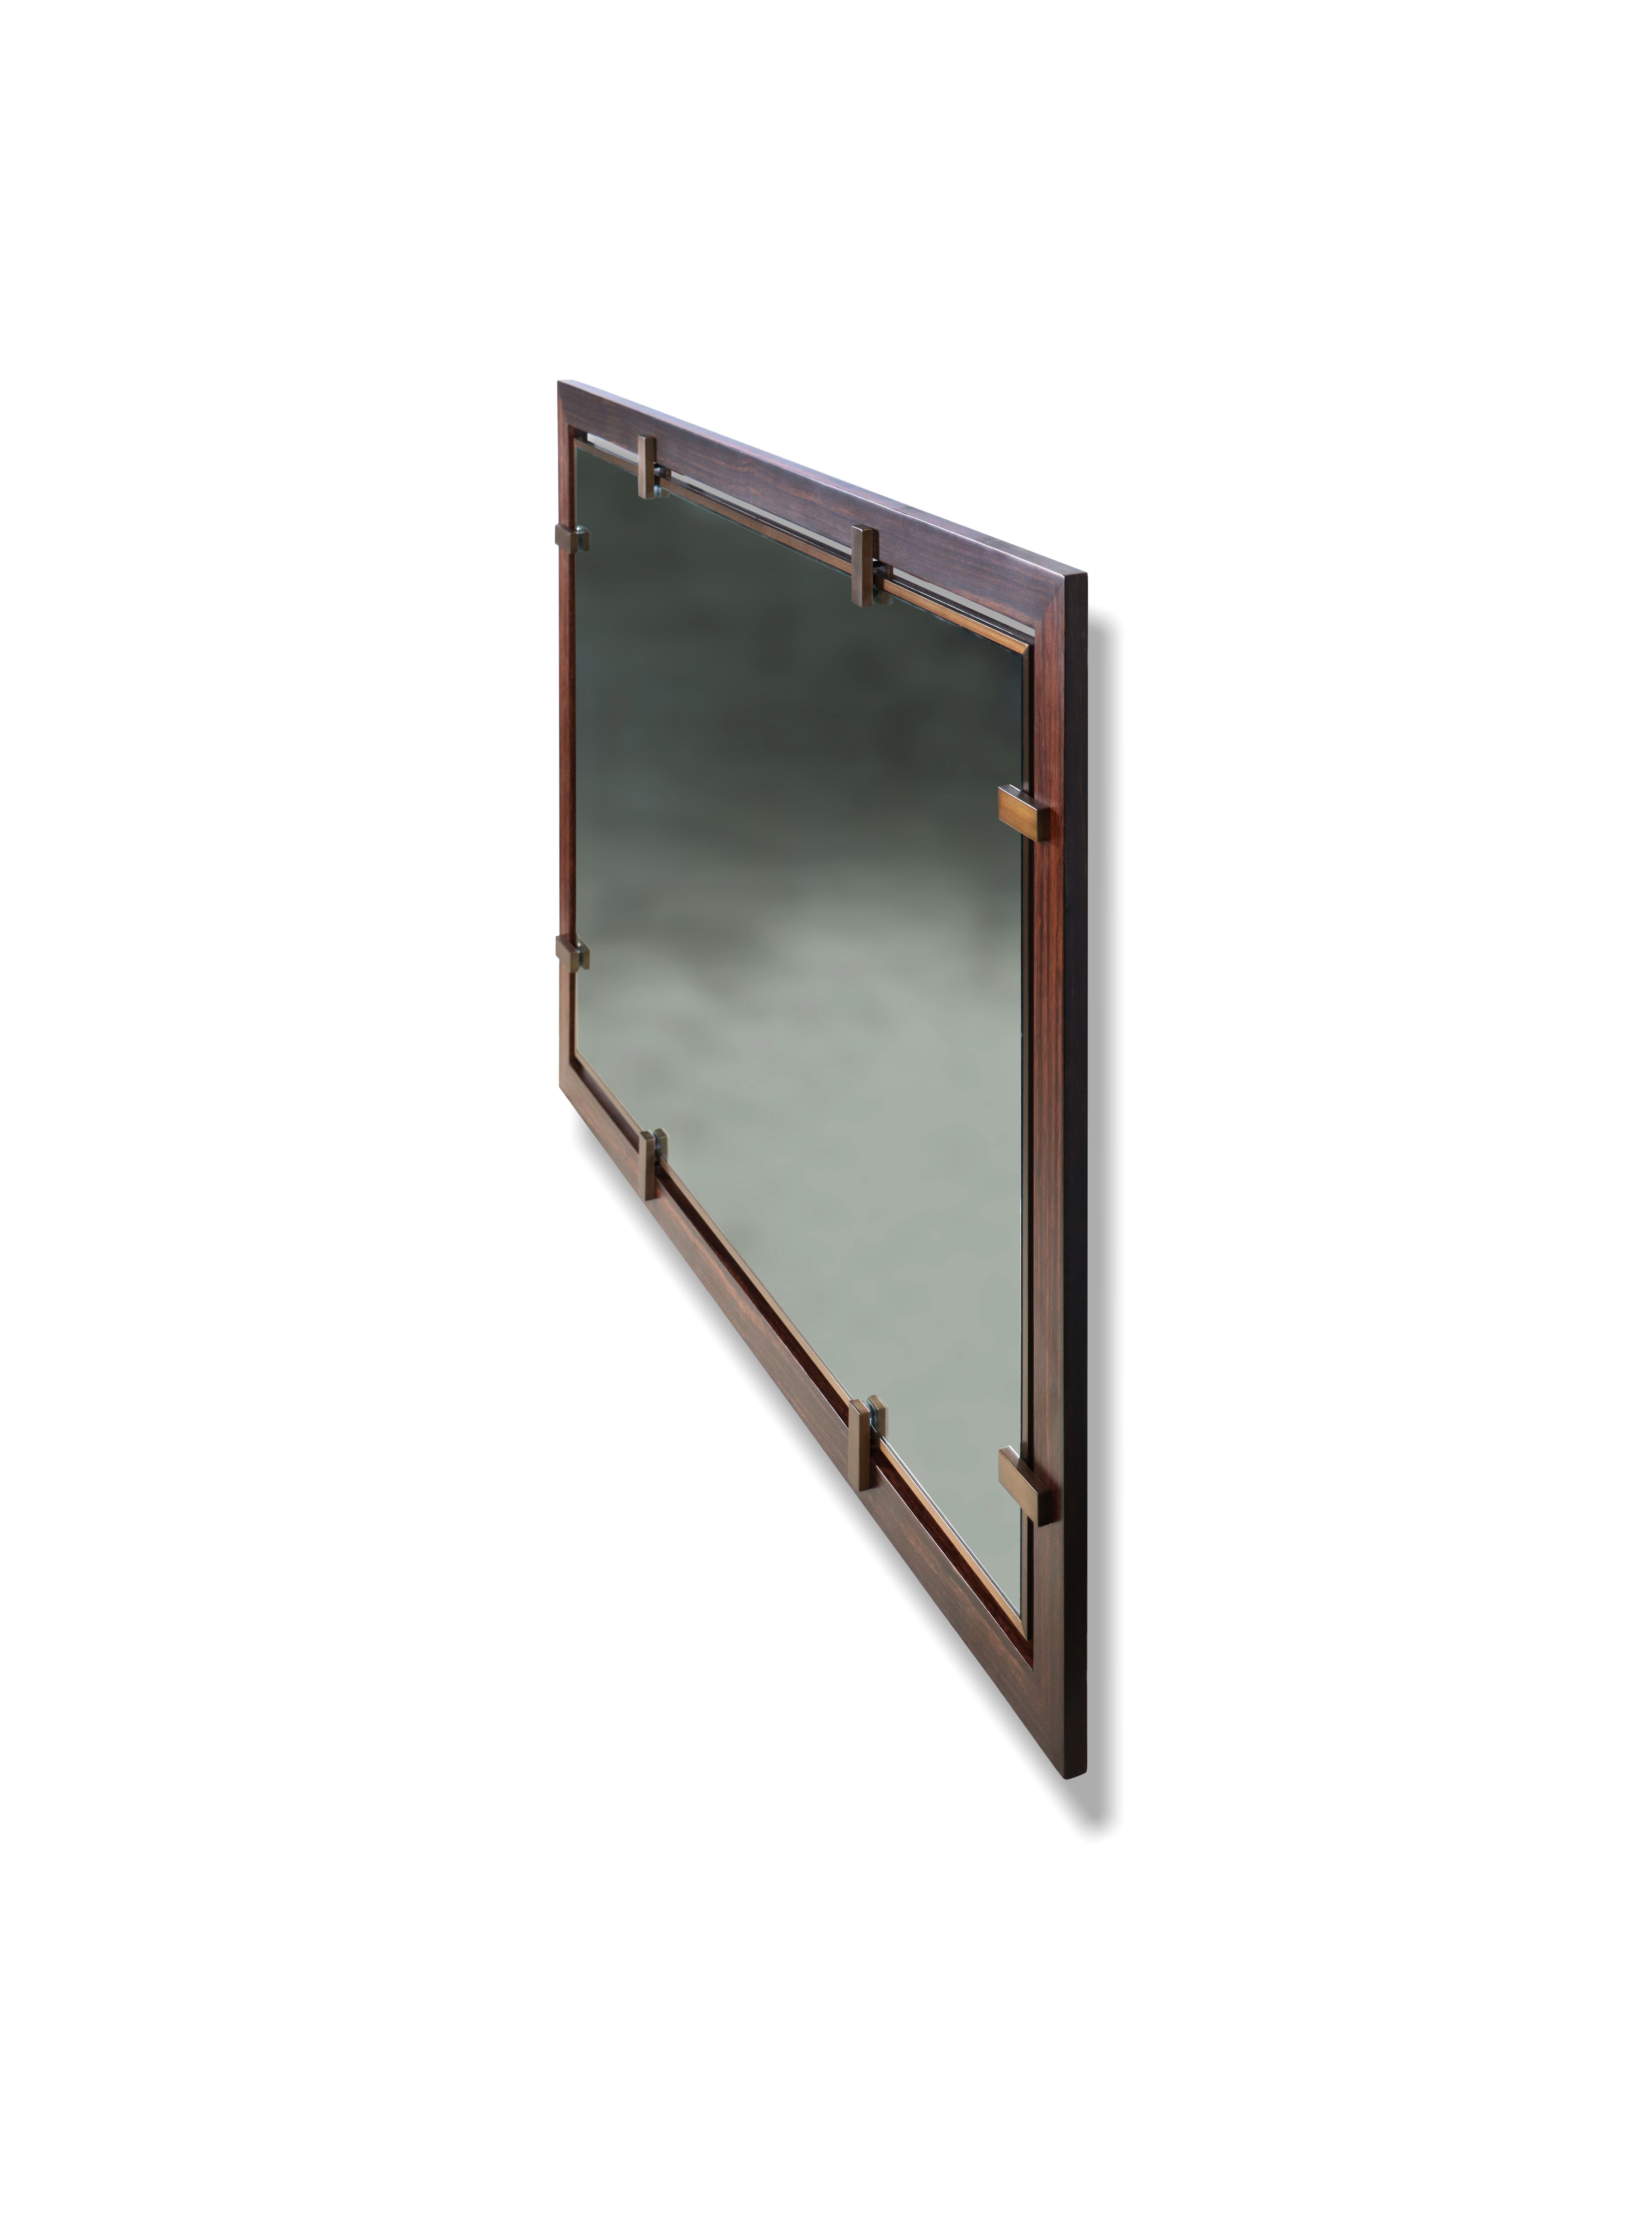 The Marco mirror features a floating glass suspended with bronze hardware. Shown here in Macassar Ebony and also can be made to order in the size, shape, material and finish of your choice and also as a floor mirror. Available in solidsor